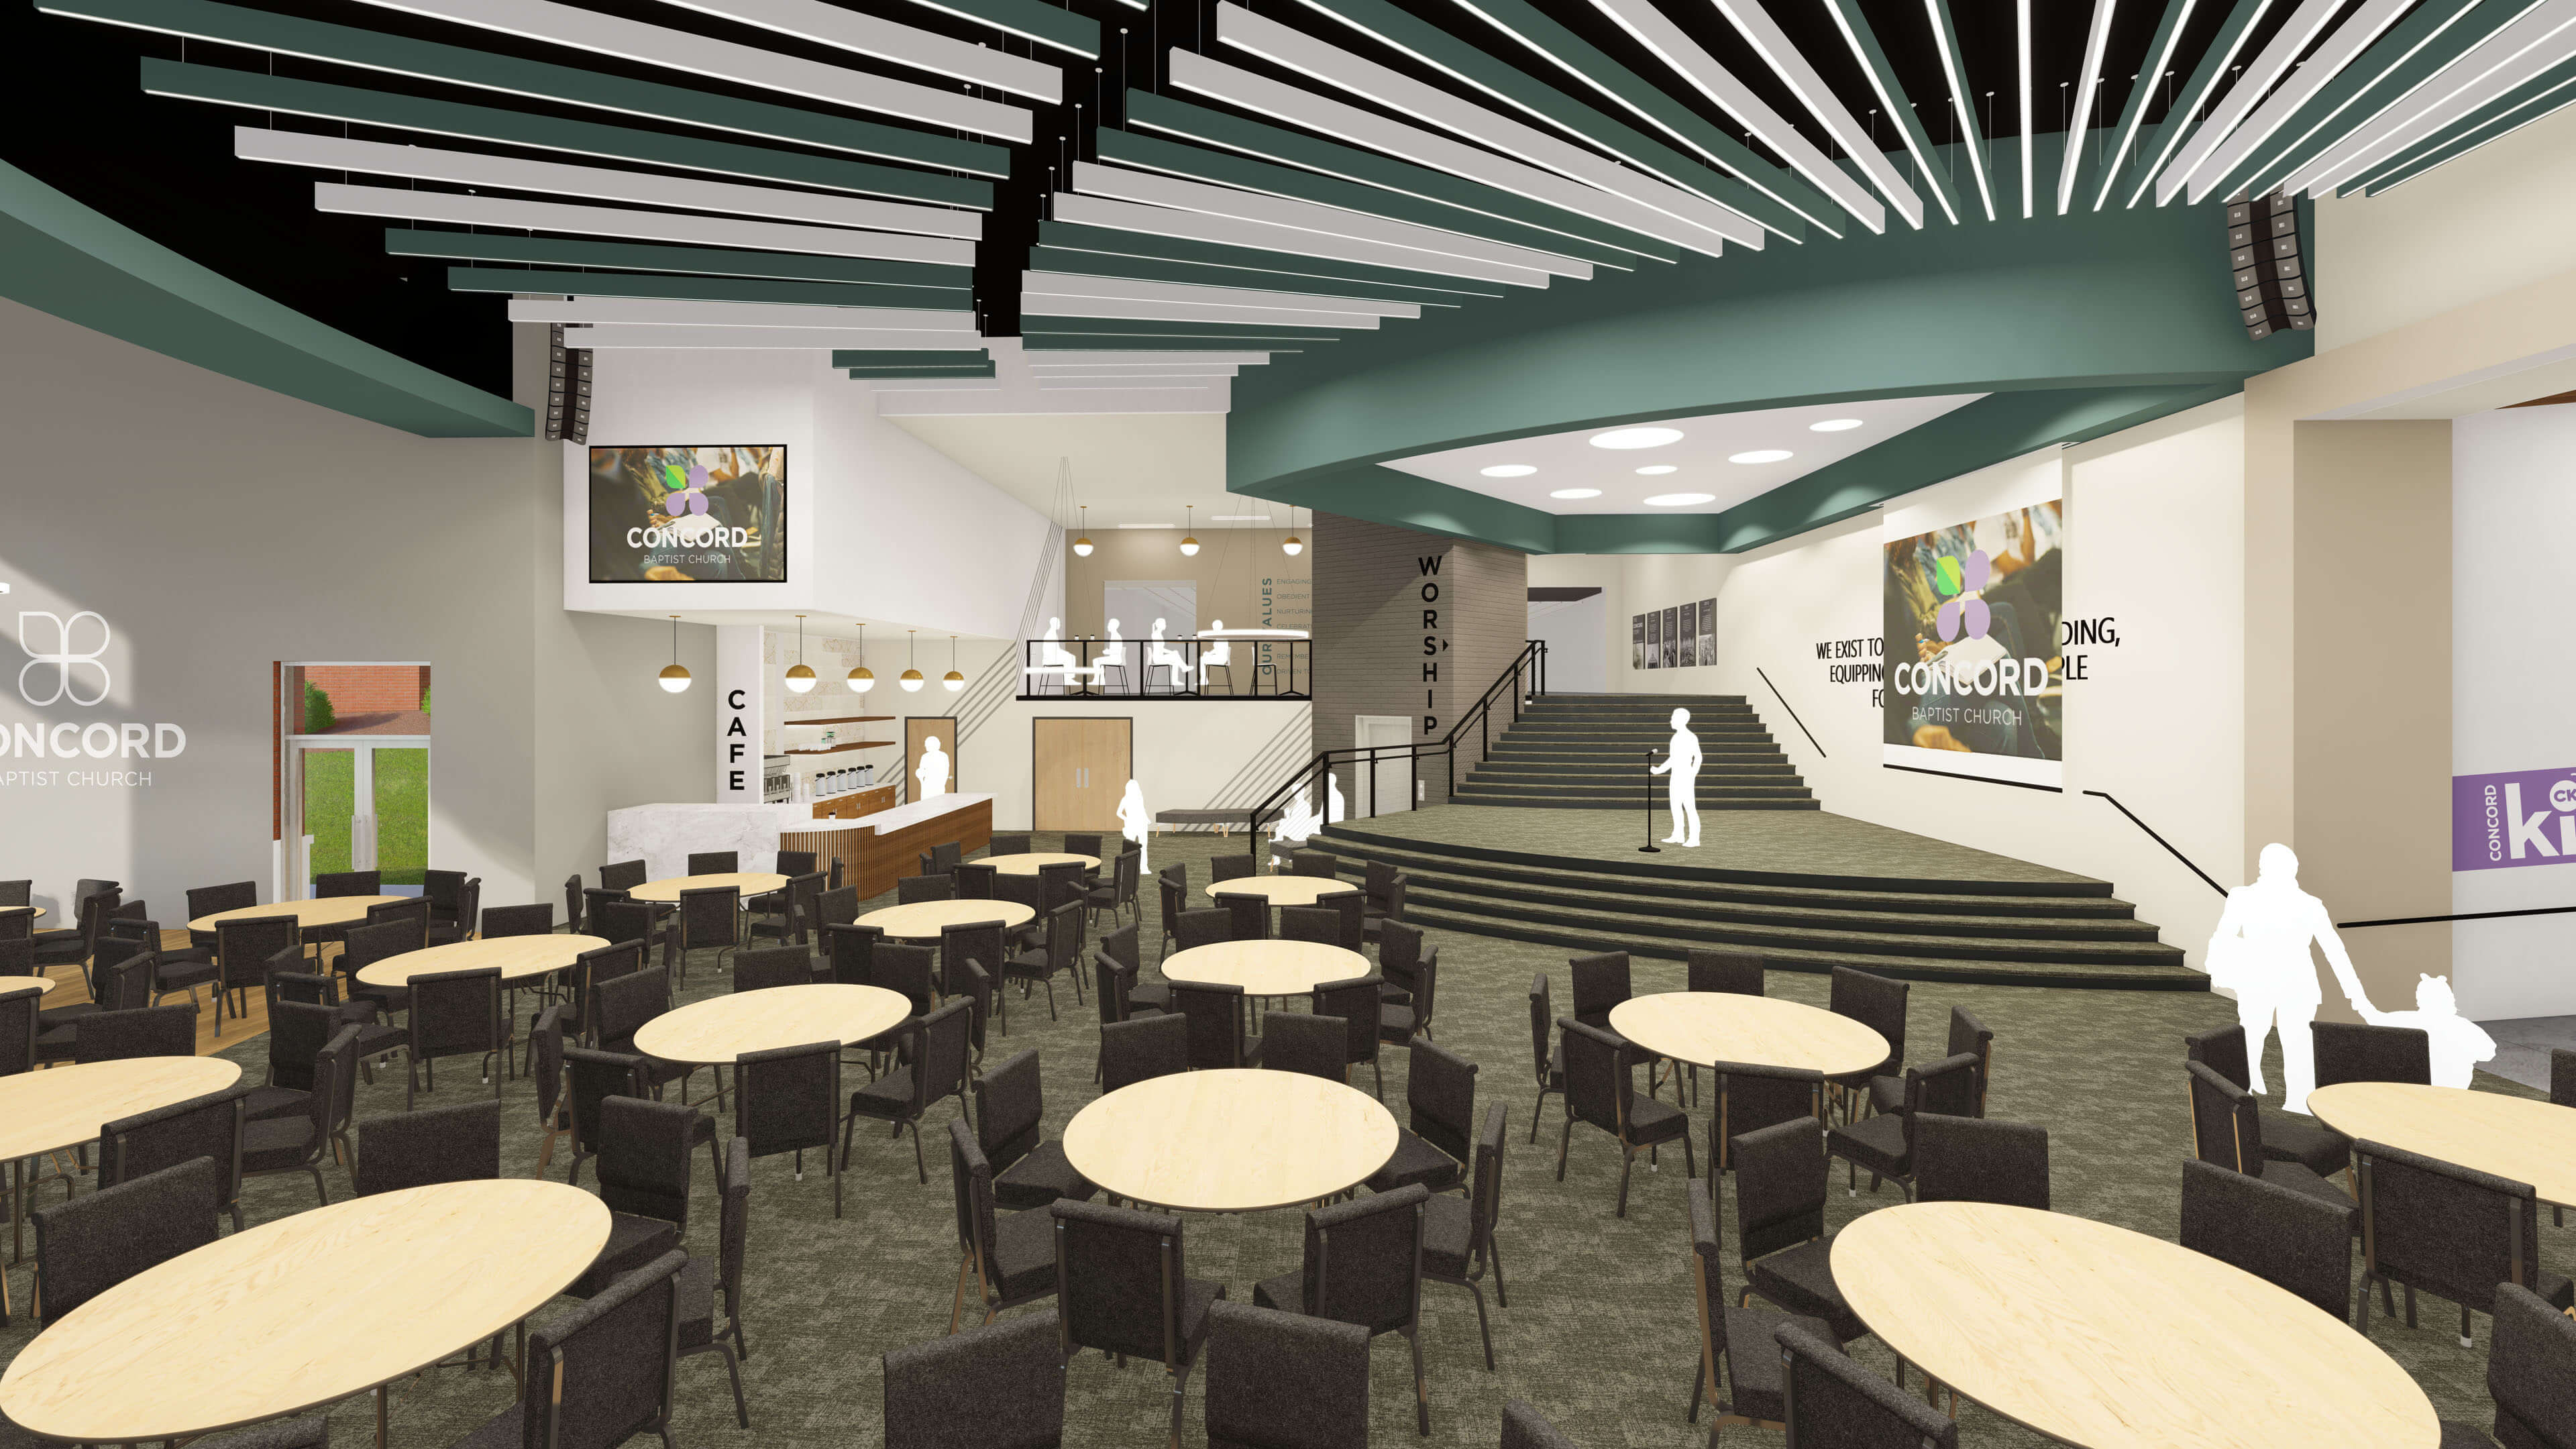 Concord Baptist Church - Primary Lobby Event Interior Rendering